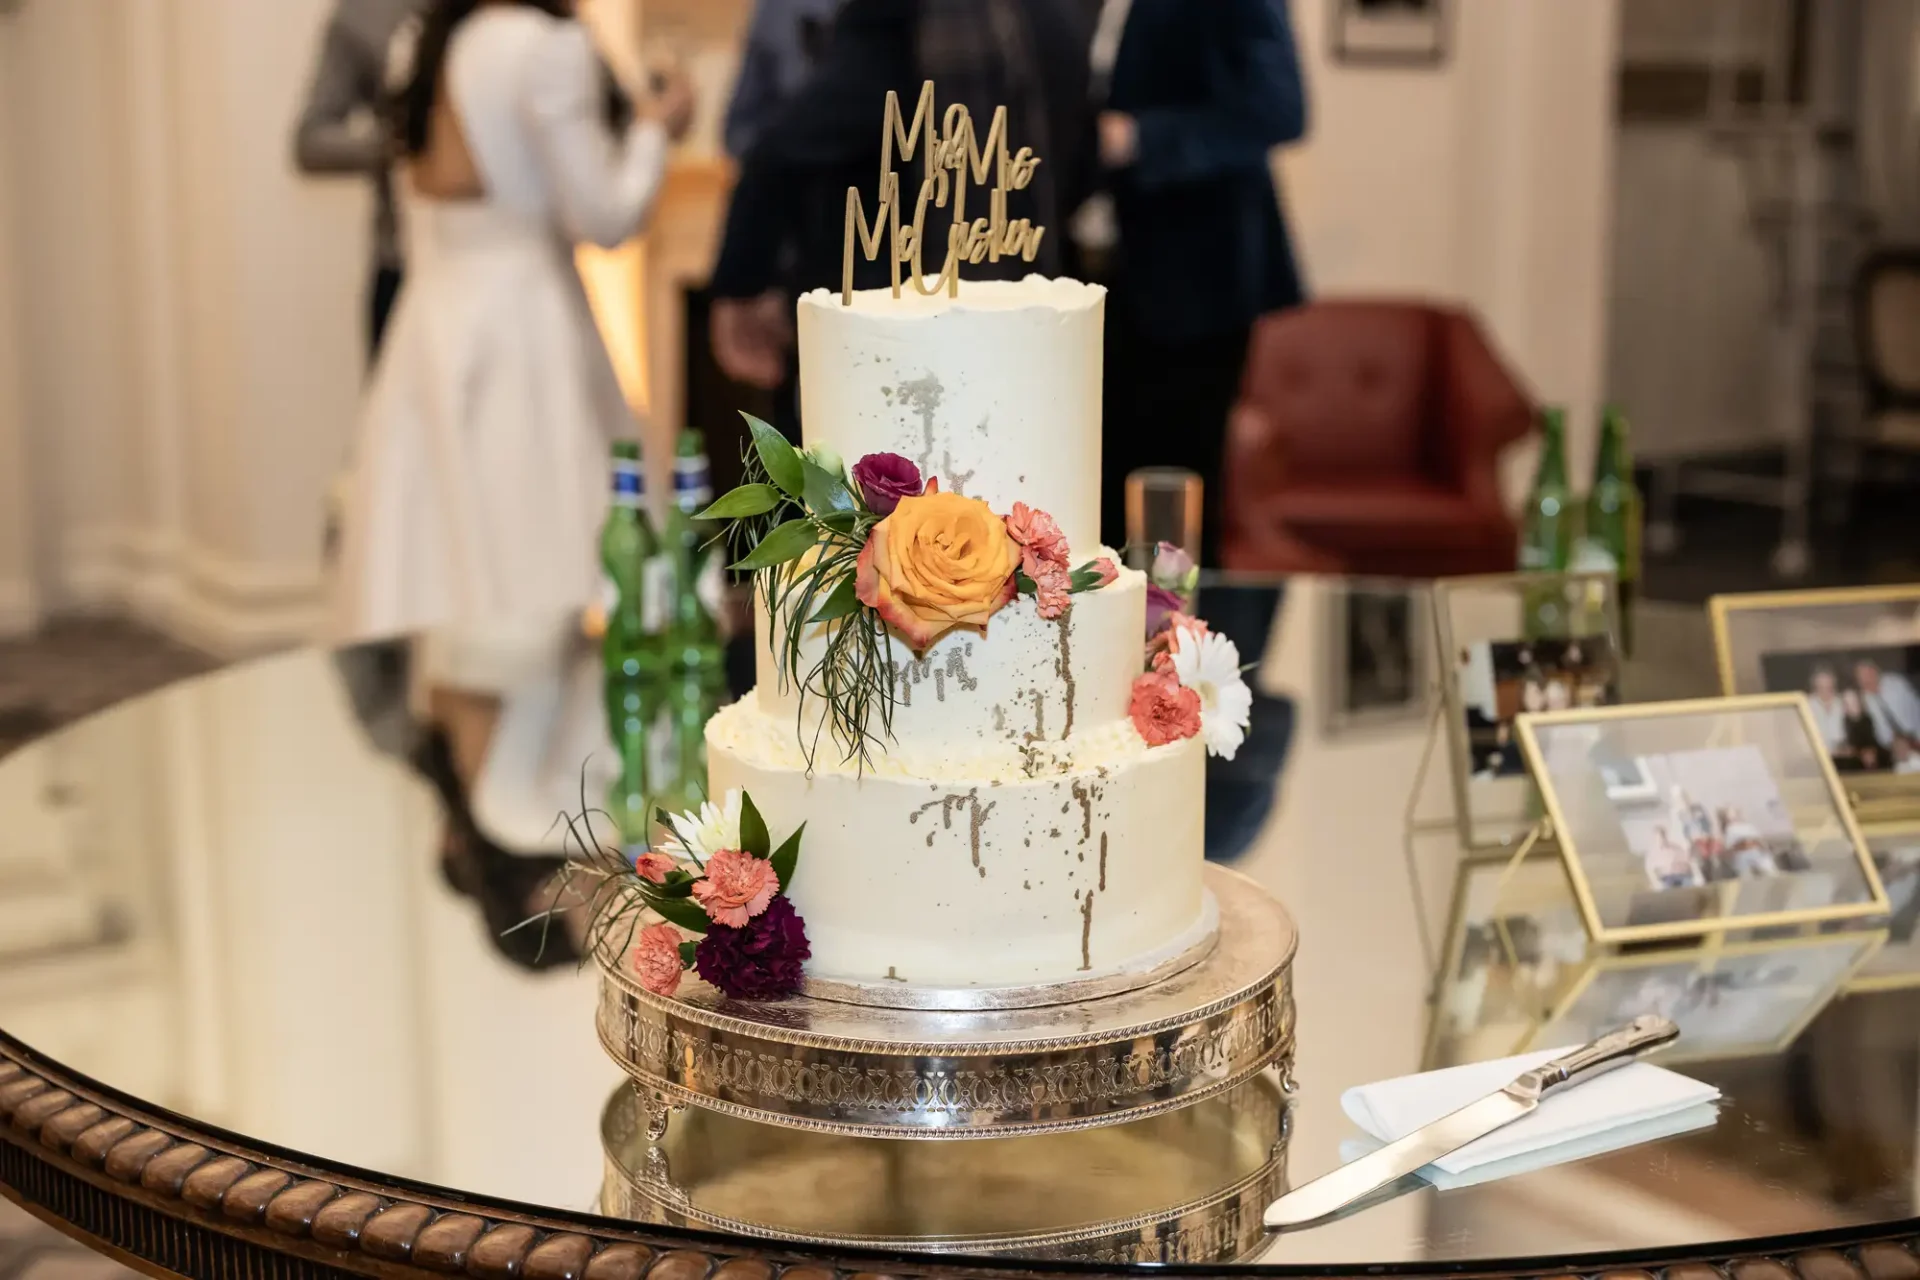 A two-tiered wedding cake decorated with fresh flowers on a glass table, with a "mr & mrs" topper, surrounded by guests in elegant attire at a reception.